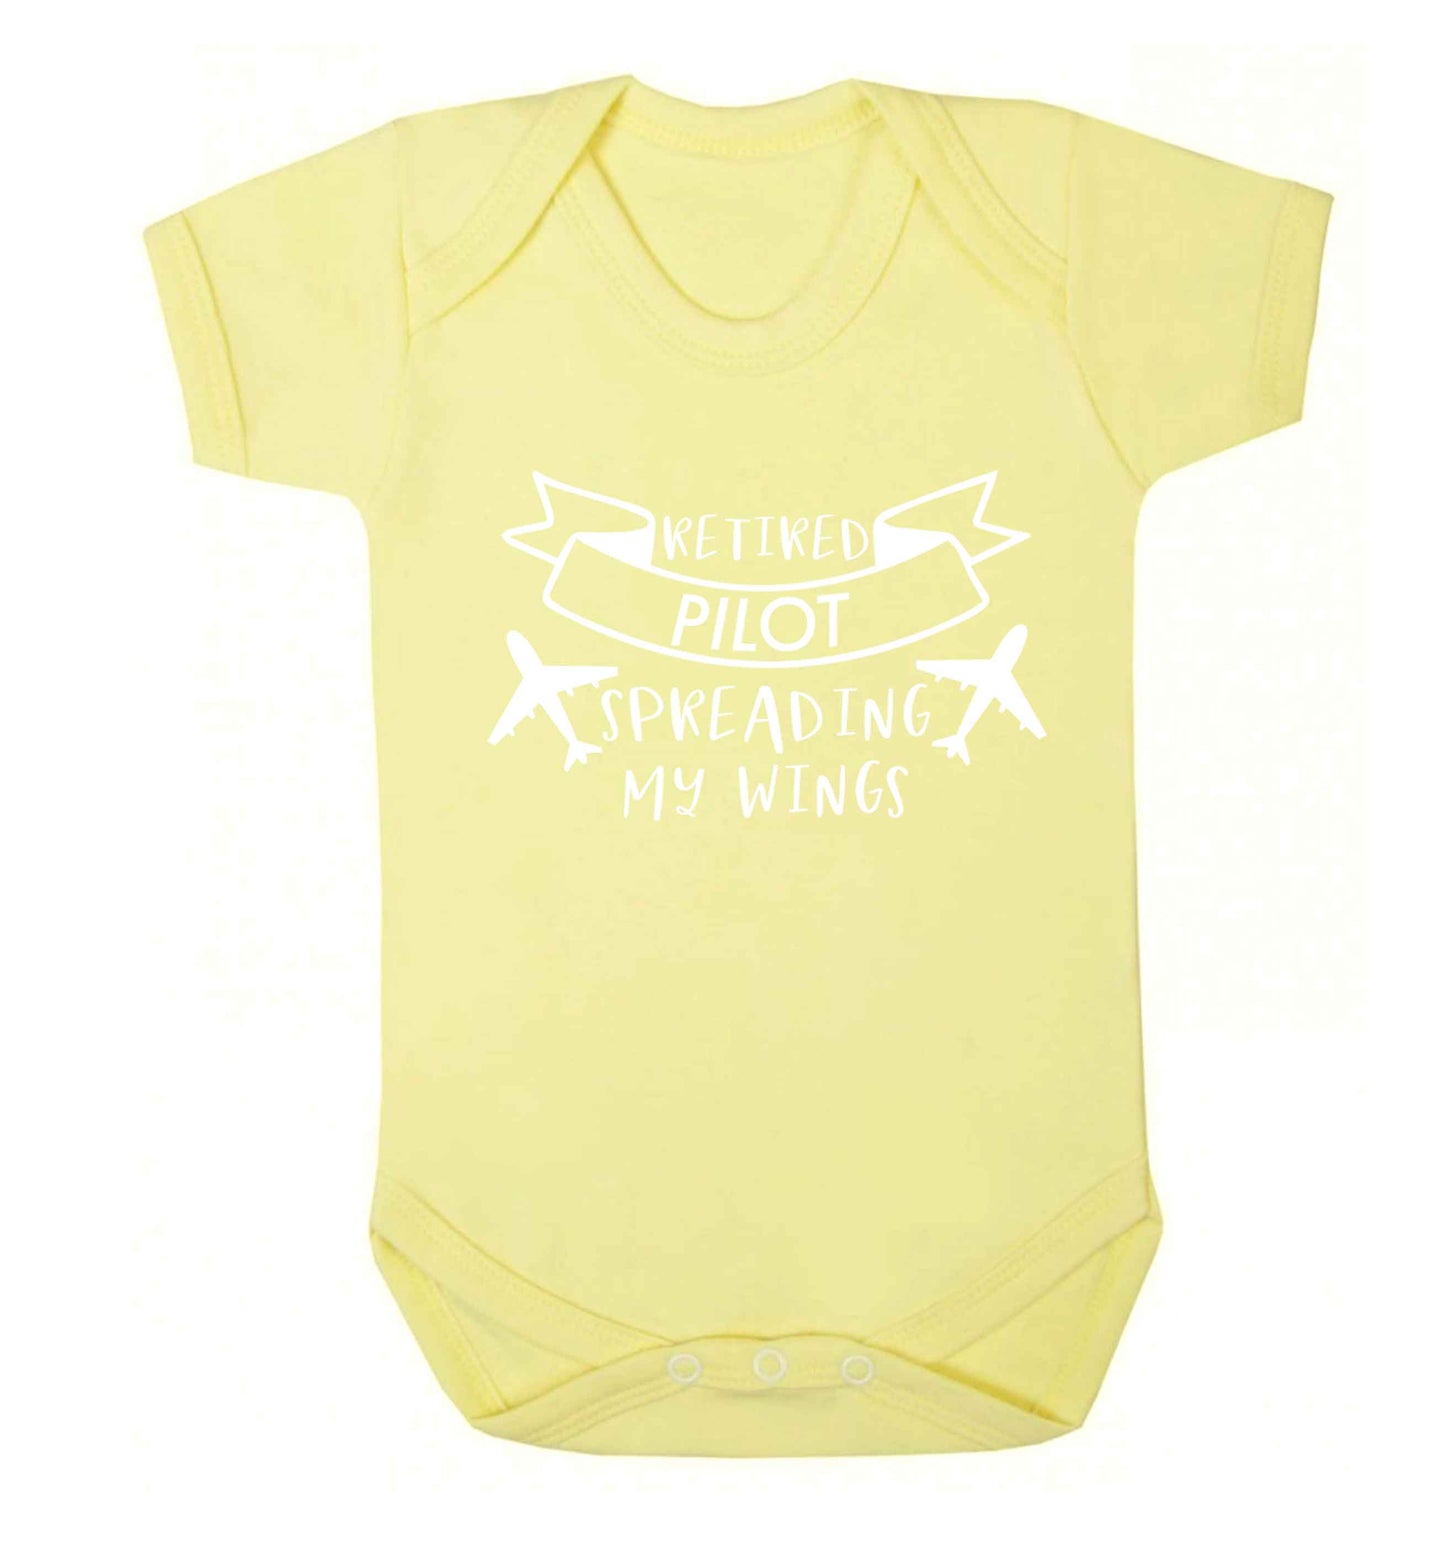 Retired pilot spreading my wings Baby Vest pale yellow 18-24 months